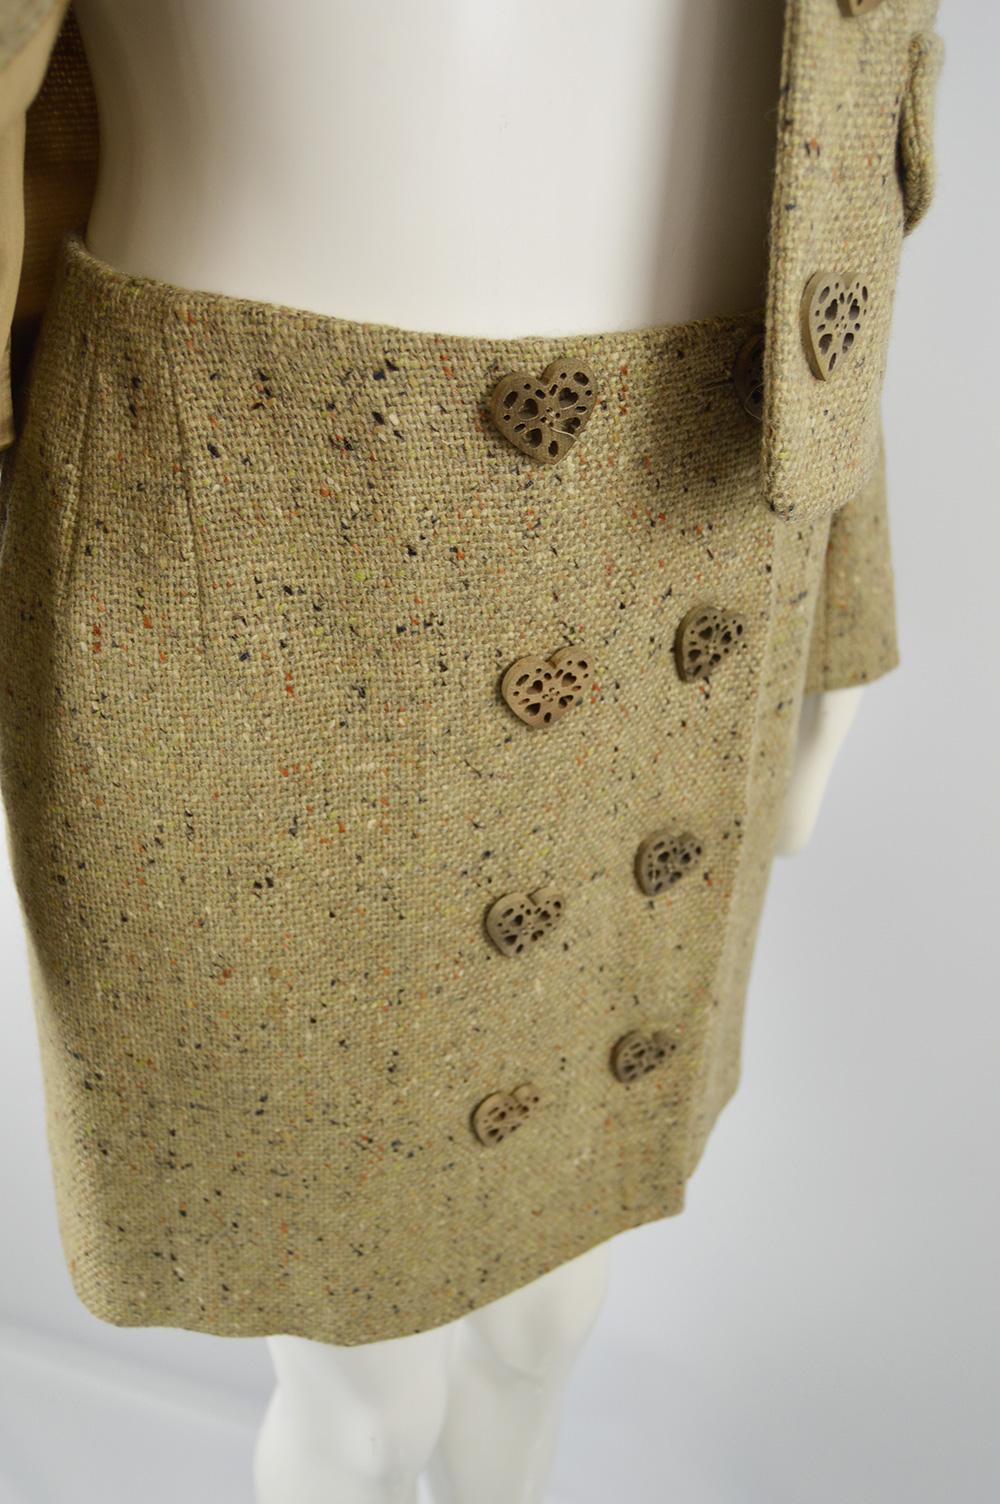 Moschino Vintage Wool Tweed 2 Piece Jacket & Skirt Suit with Heart Button, 1990s For Sale 2